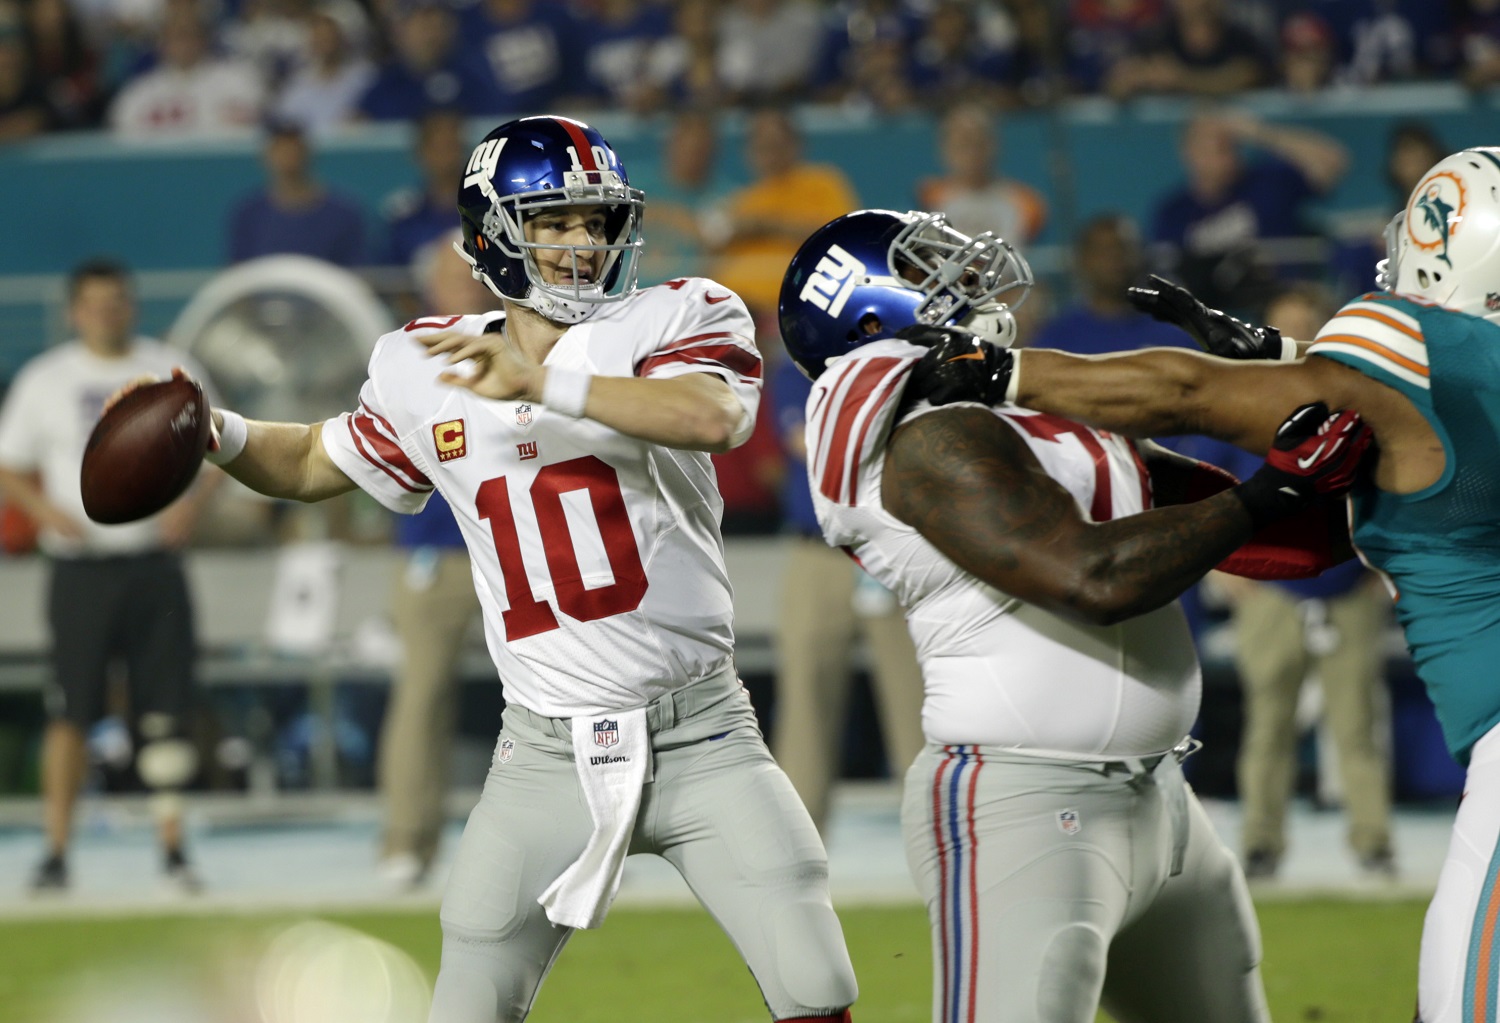 New York Giants quarterback Eli Manning (10) looks to pass during the first half of an NFL football game against the Miami Dolphins, Monday, Dec. 14, 2015, in Miami Gardens, Fla.  (AP Photo/Wilfredo Lee)